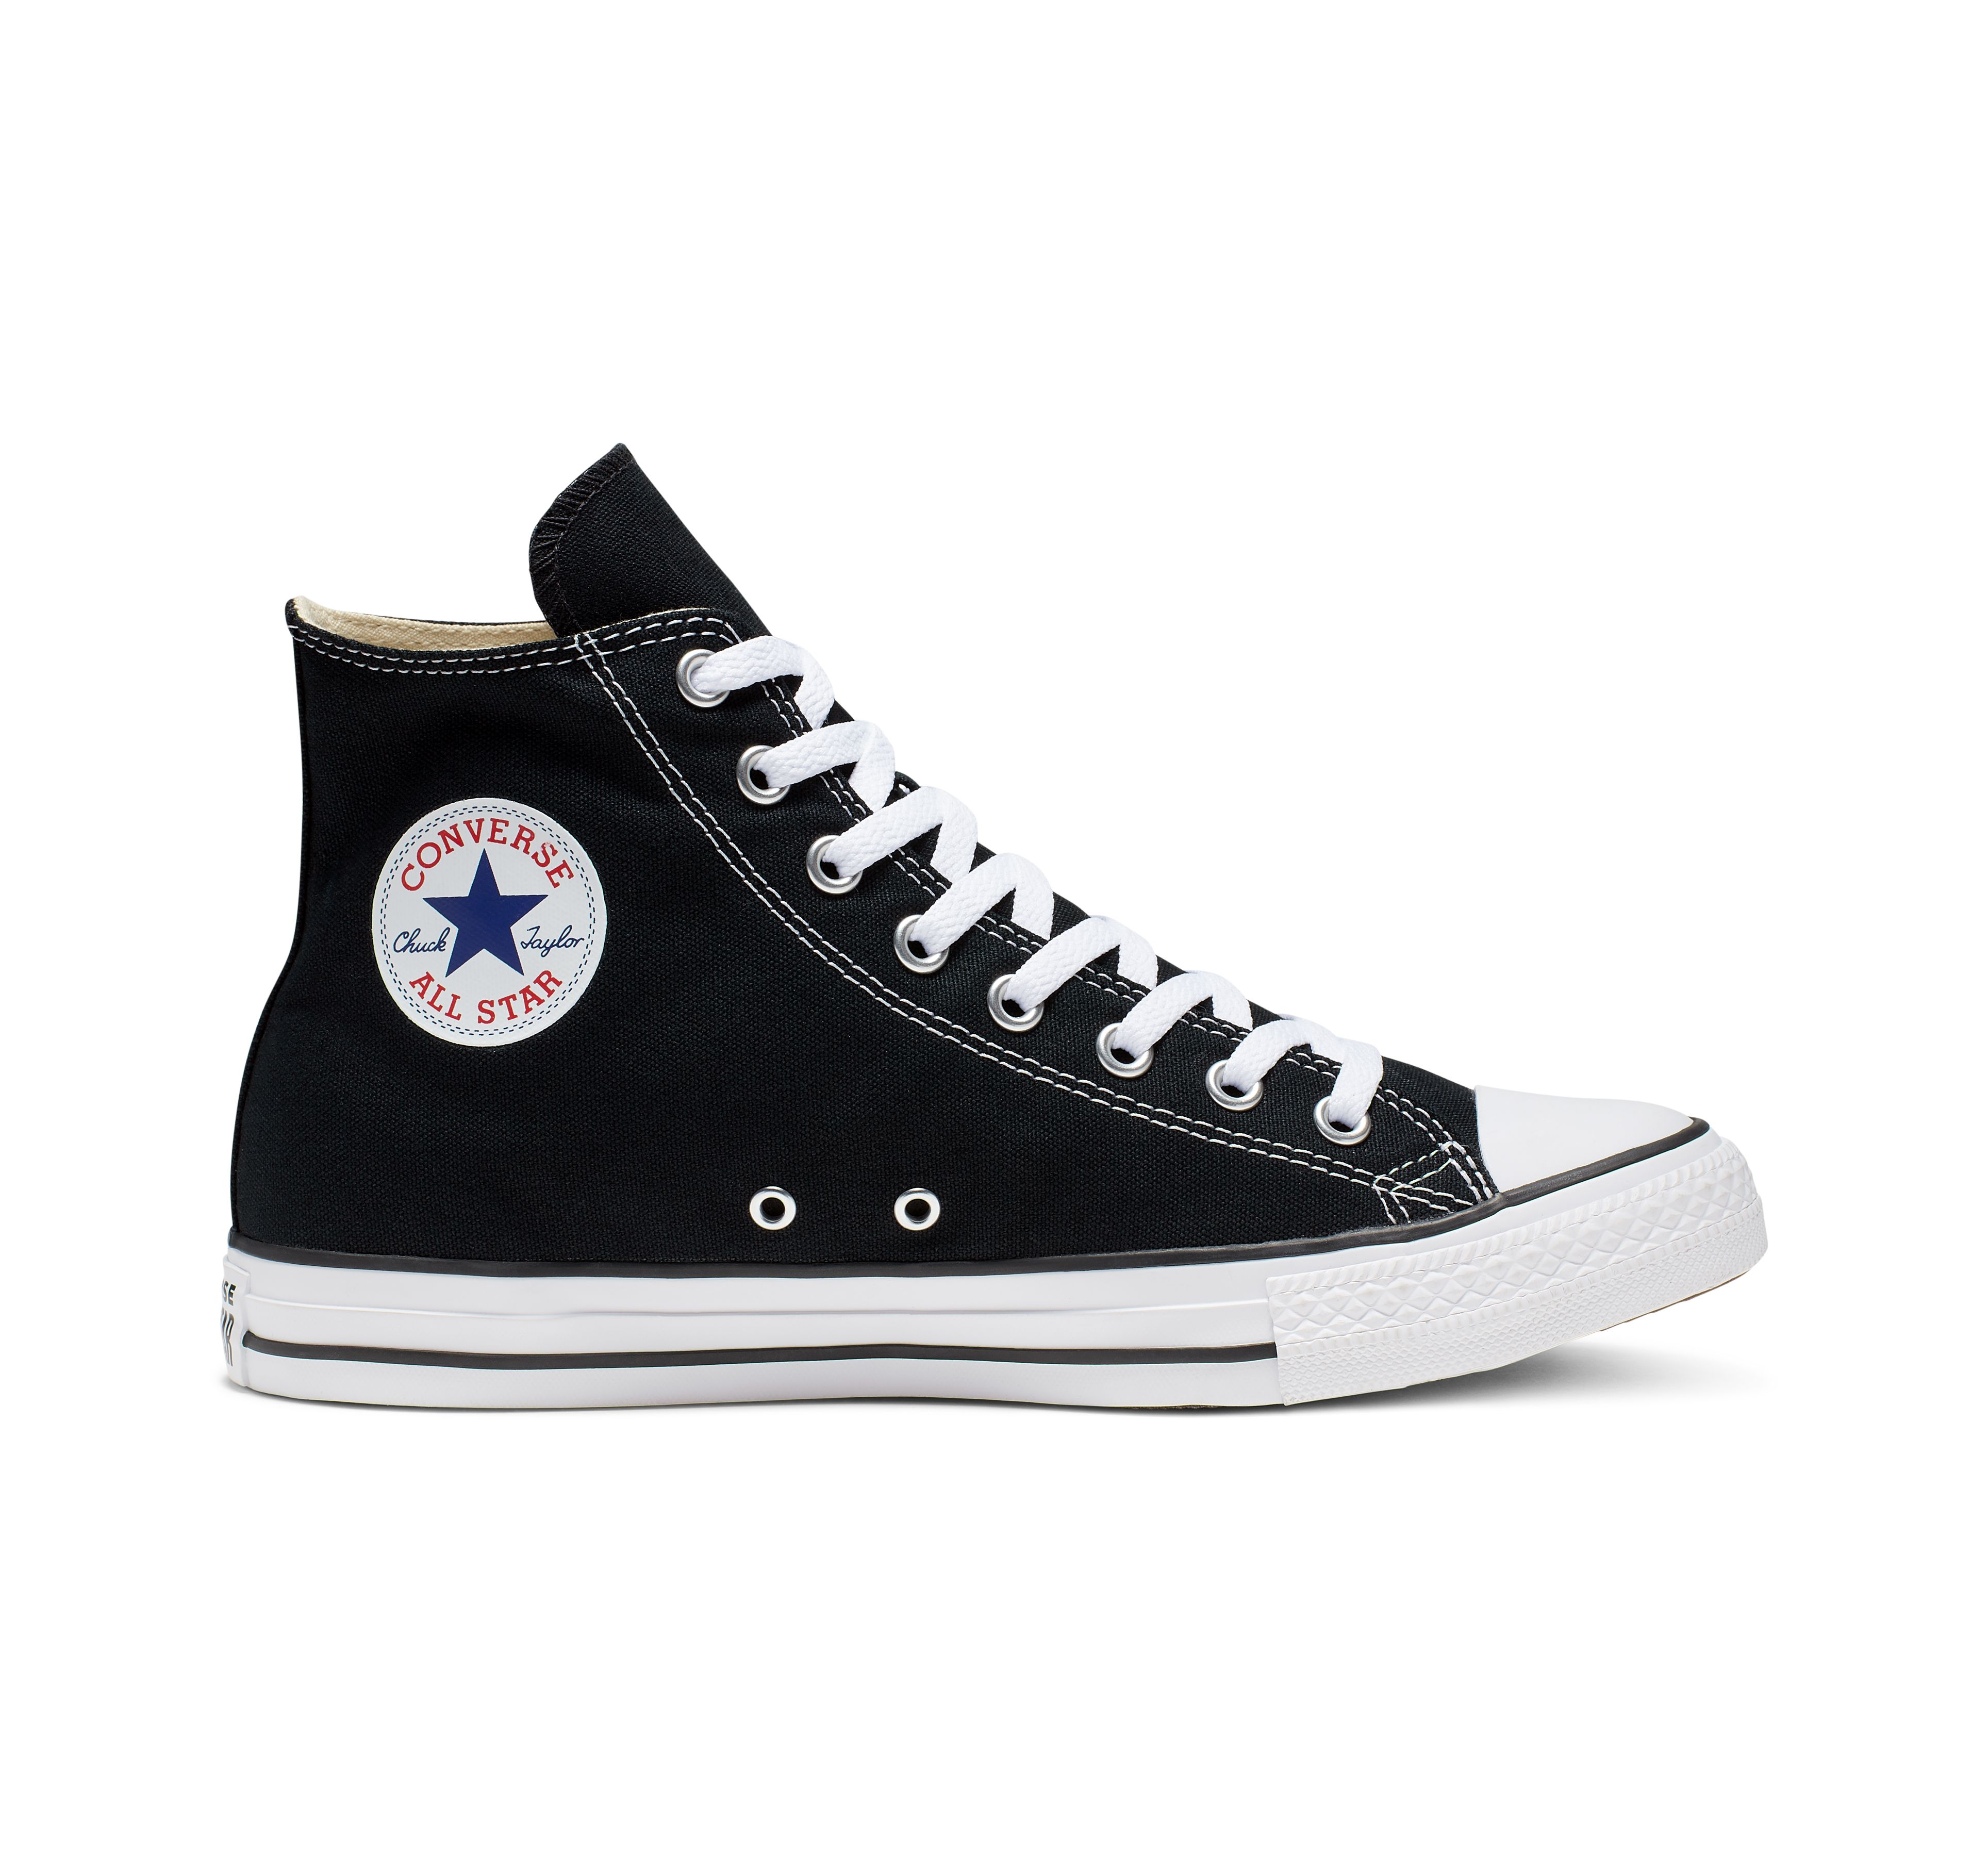 class a converse online shop in philippines